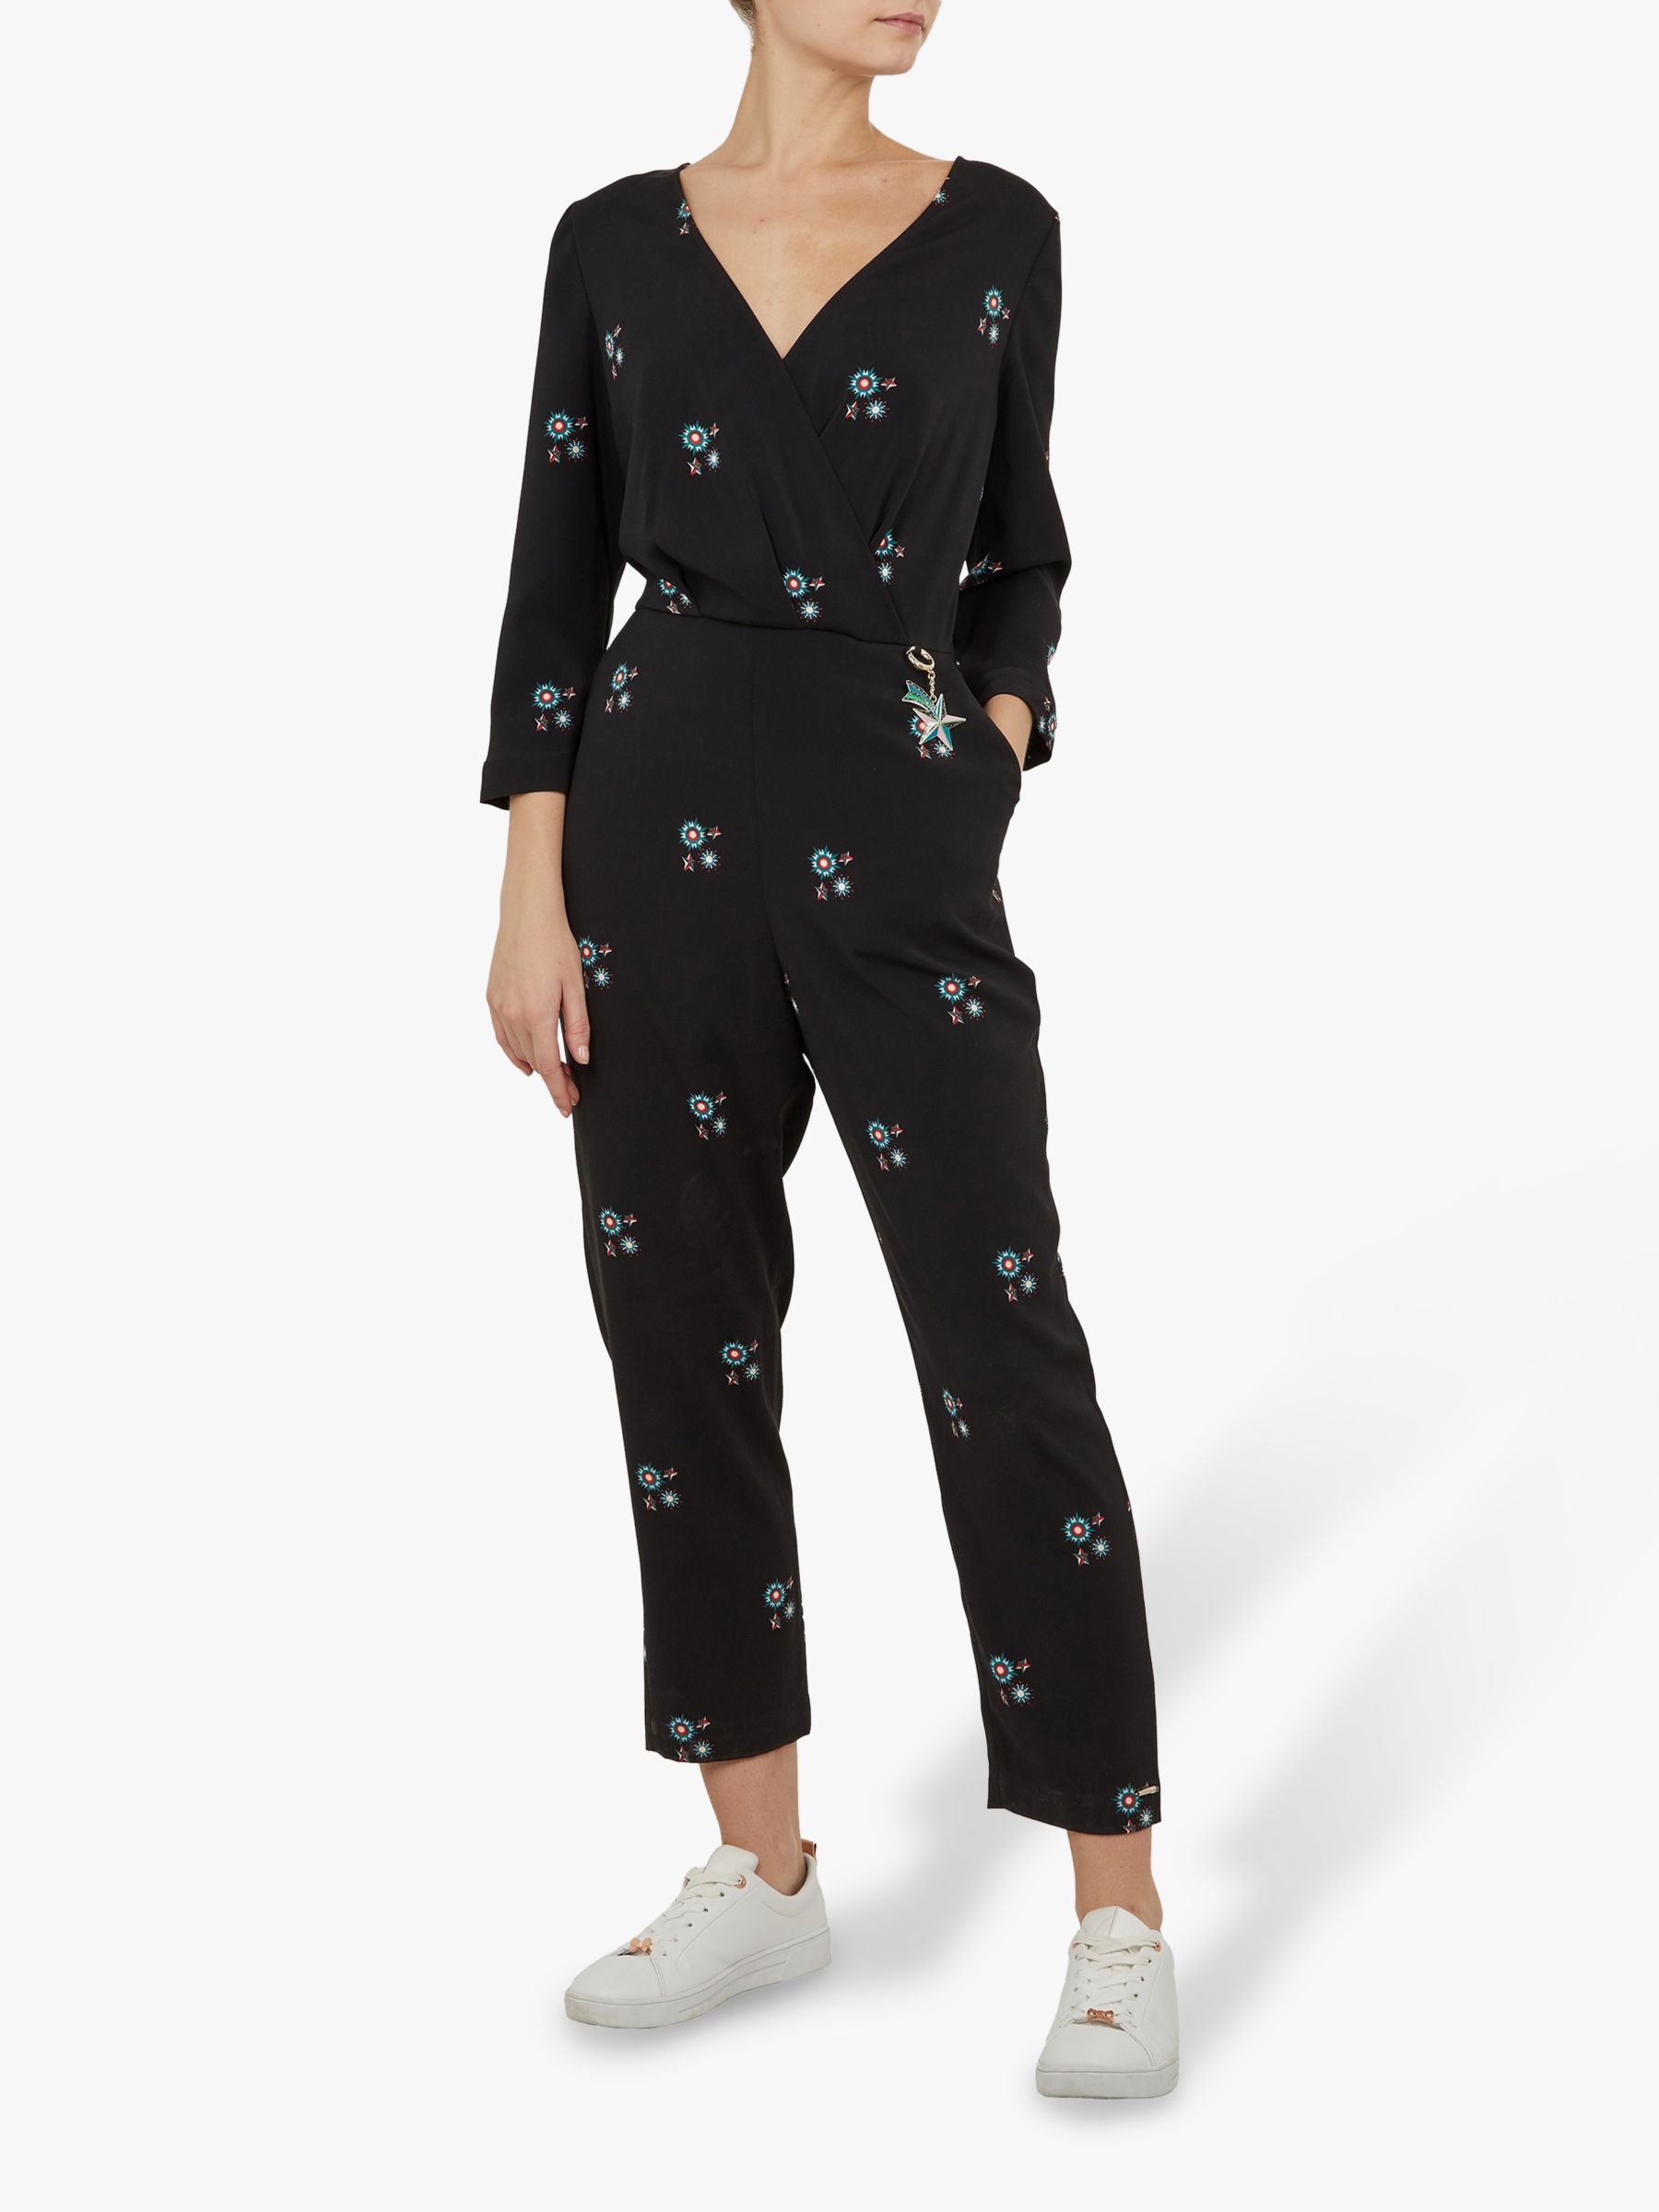 jumpsuit with numbers on it